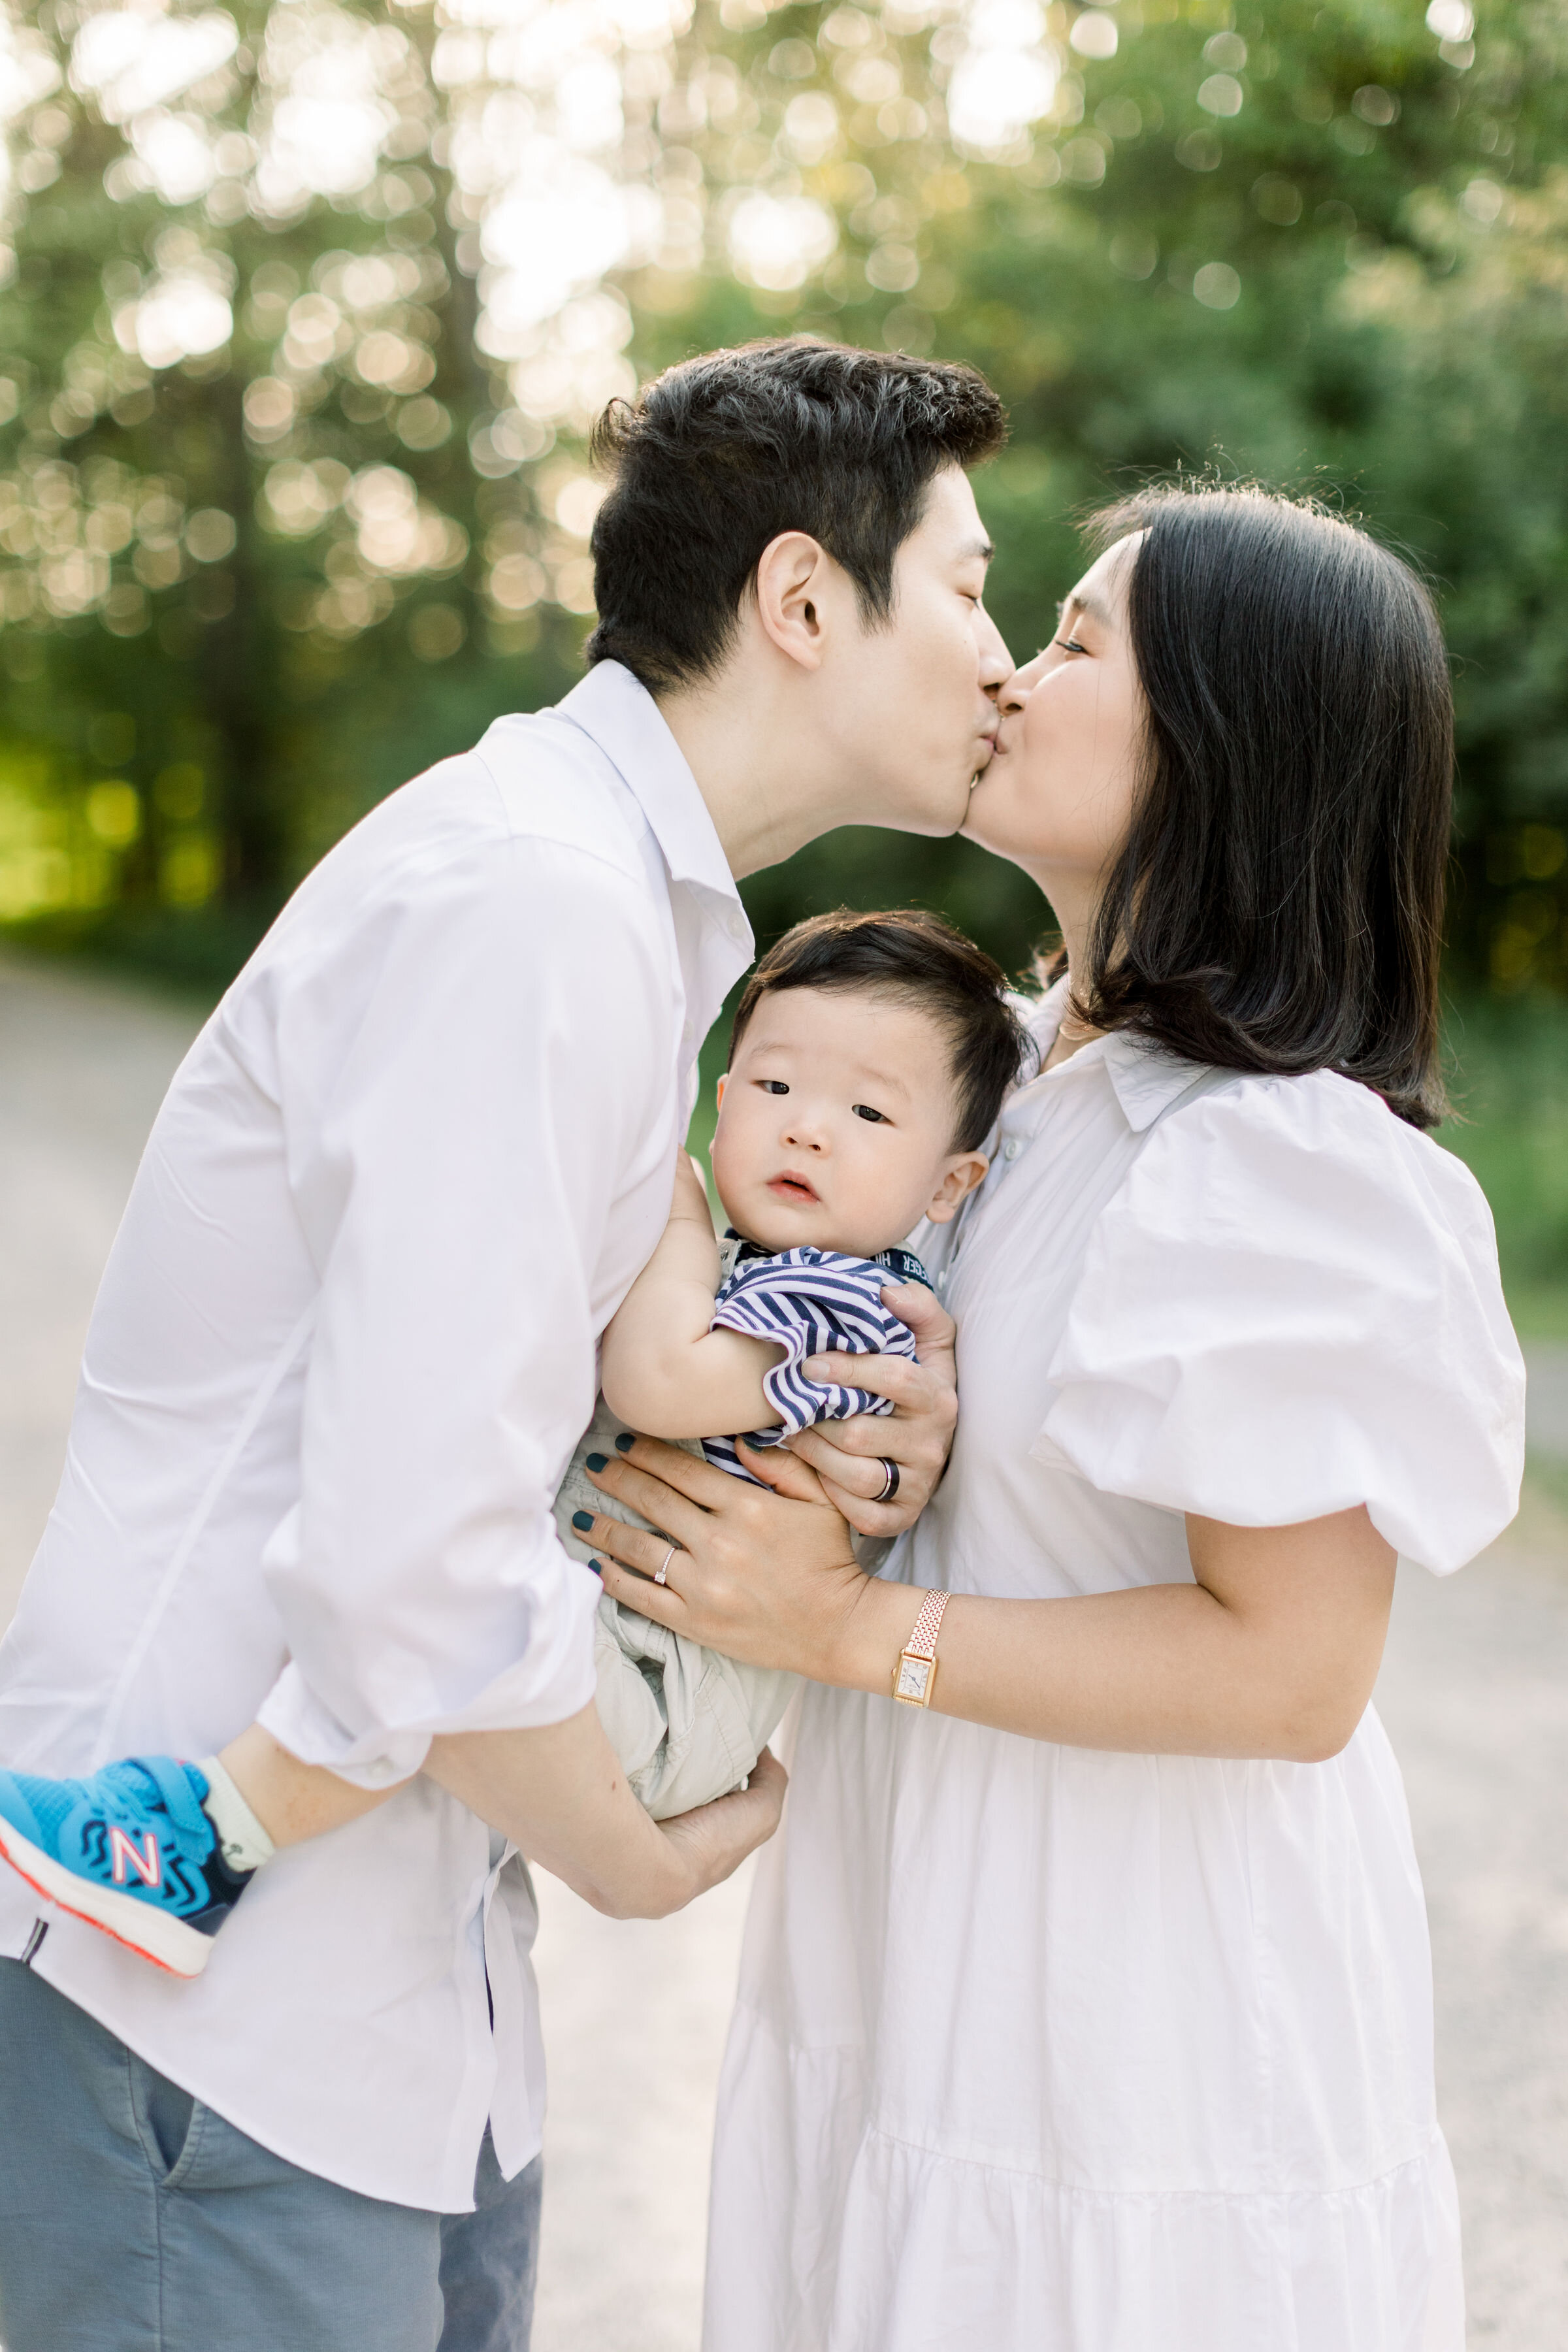  Ottawa, Canada family photographer, Chelsea Mason photography this couple holding their toddler son between them as they lean in for a kiss. kissing couple with toddler boy Ottawa family photographer white family photo outfits women's white tiered d